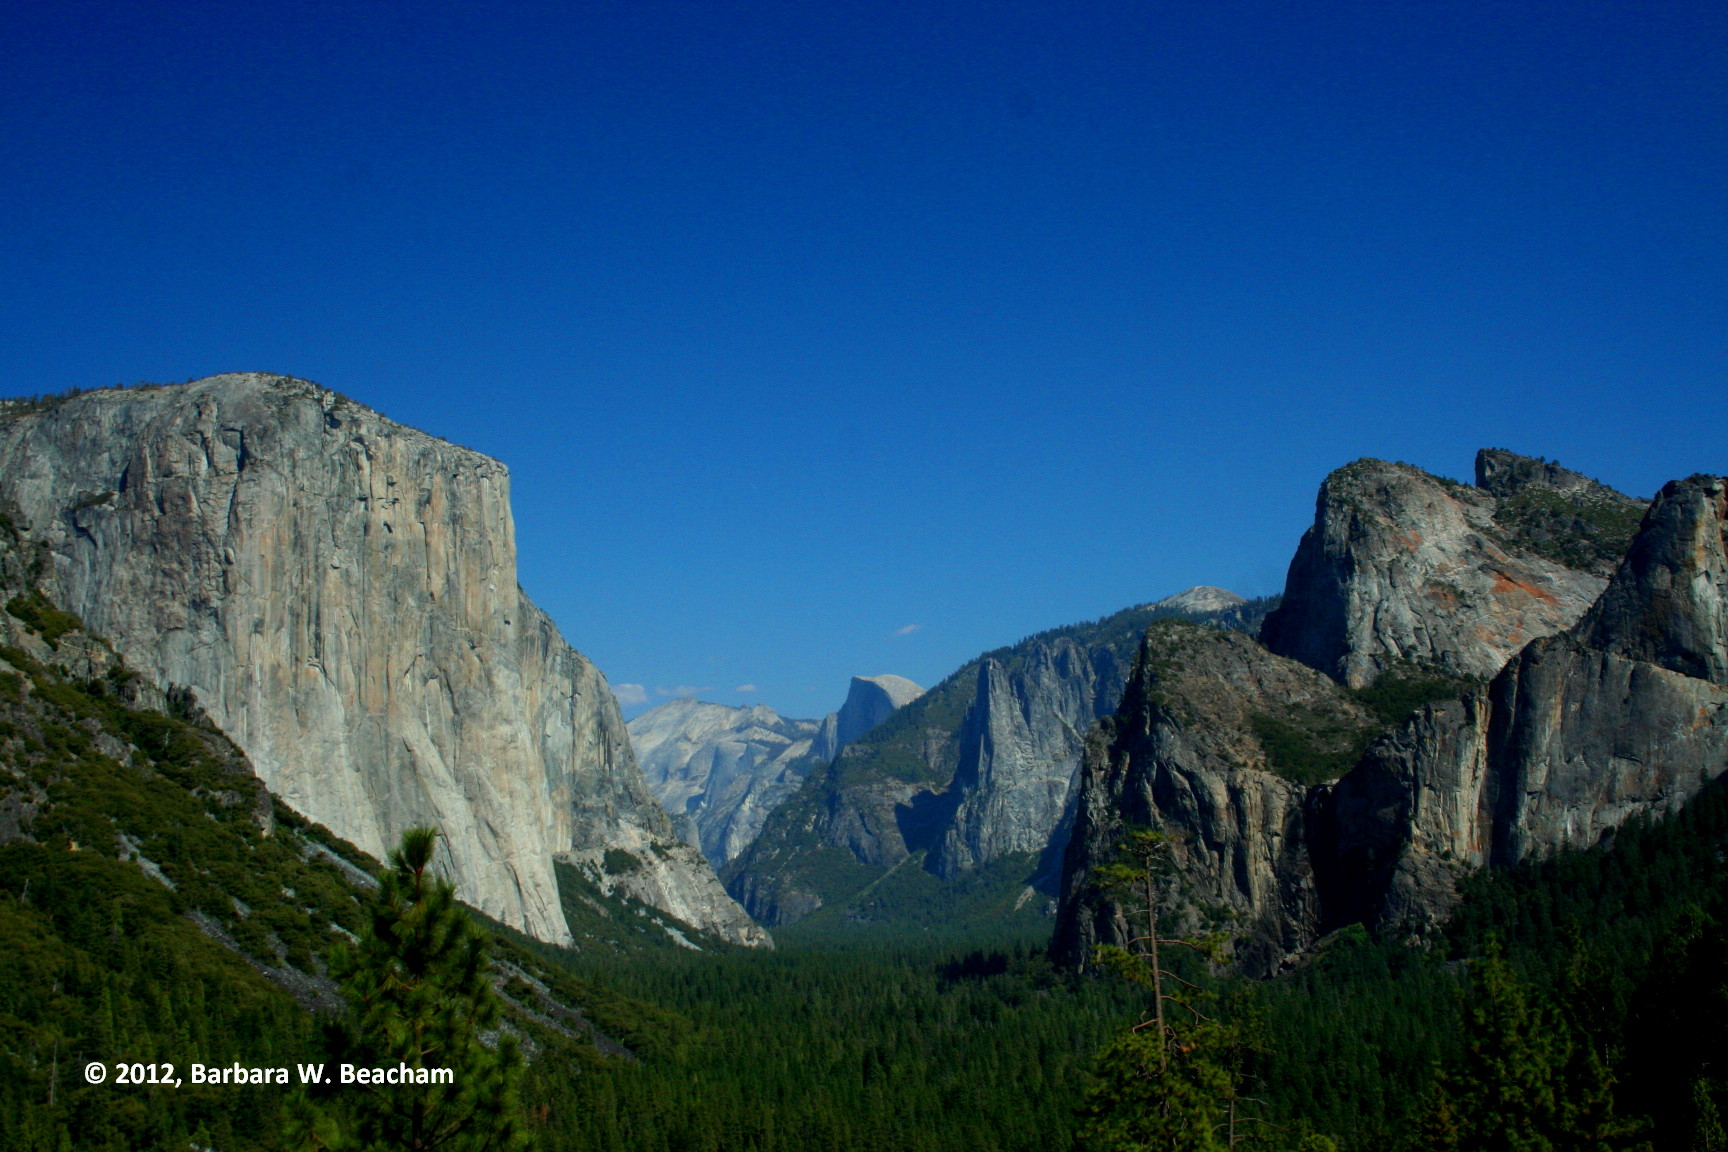 Yosemite Valley With Half Dome In The Background